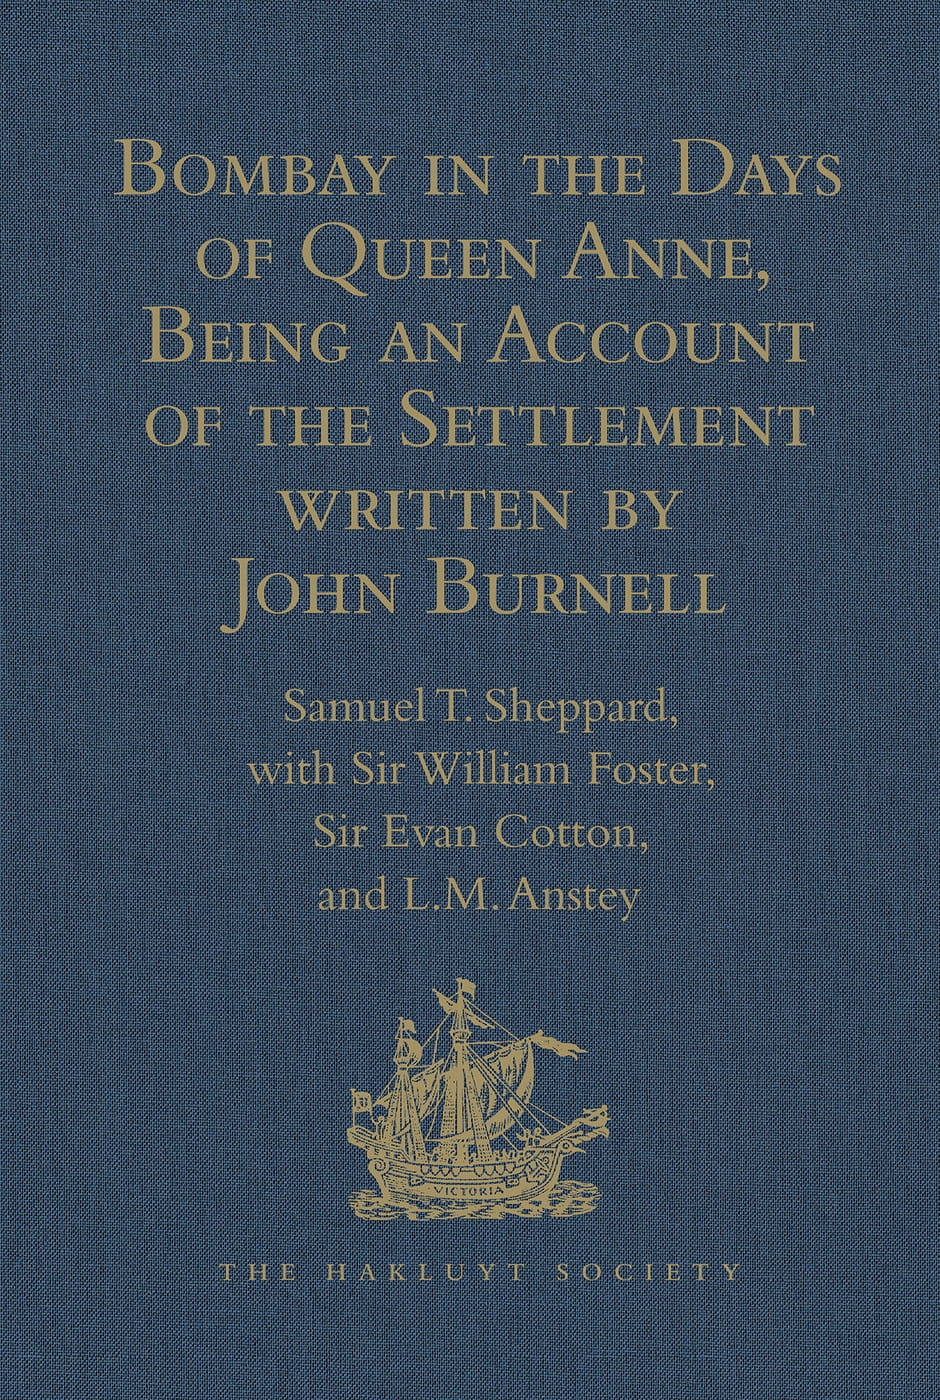 Bombay in the Days of Queen Anne, Being an Account of the Settlement Written by John Burnell